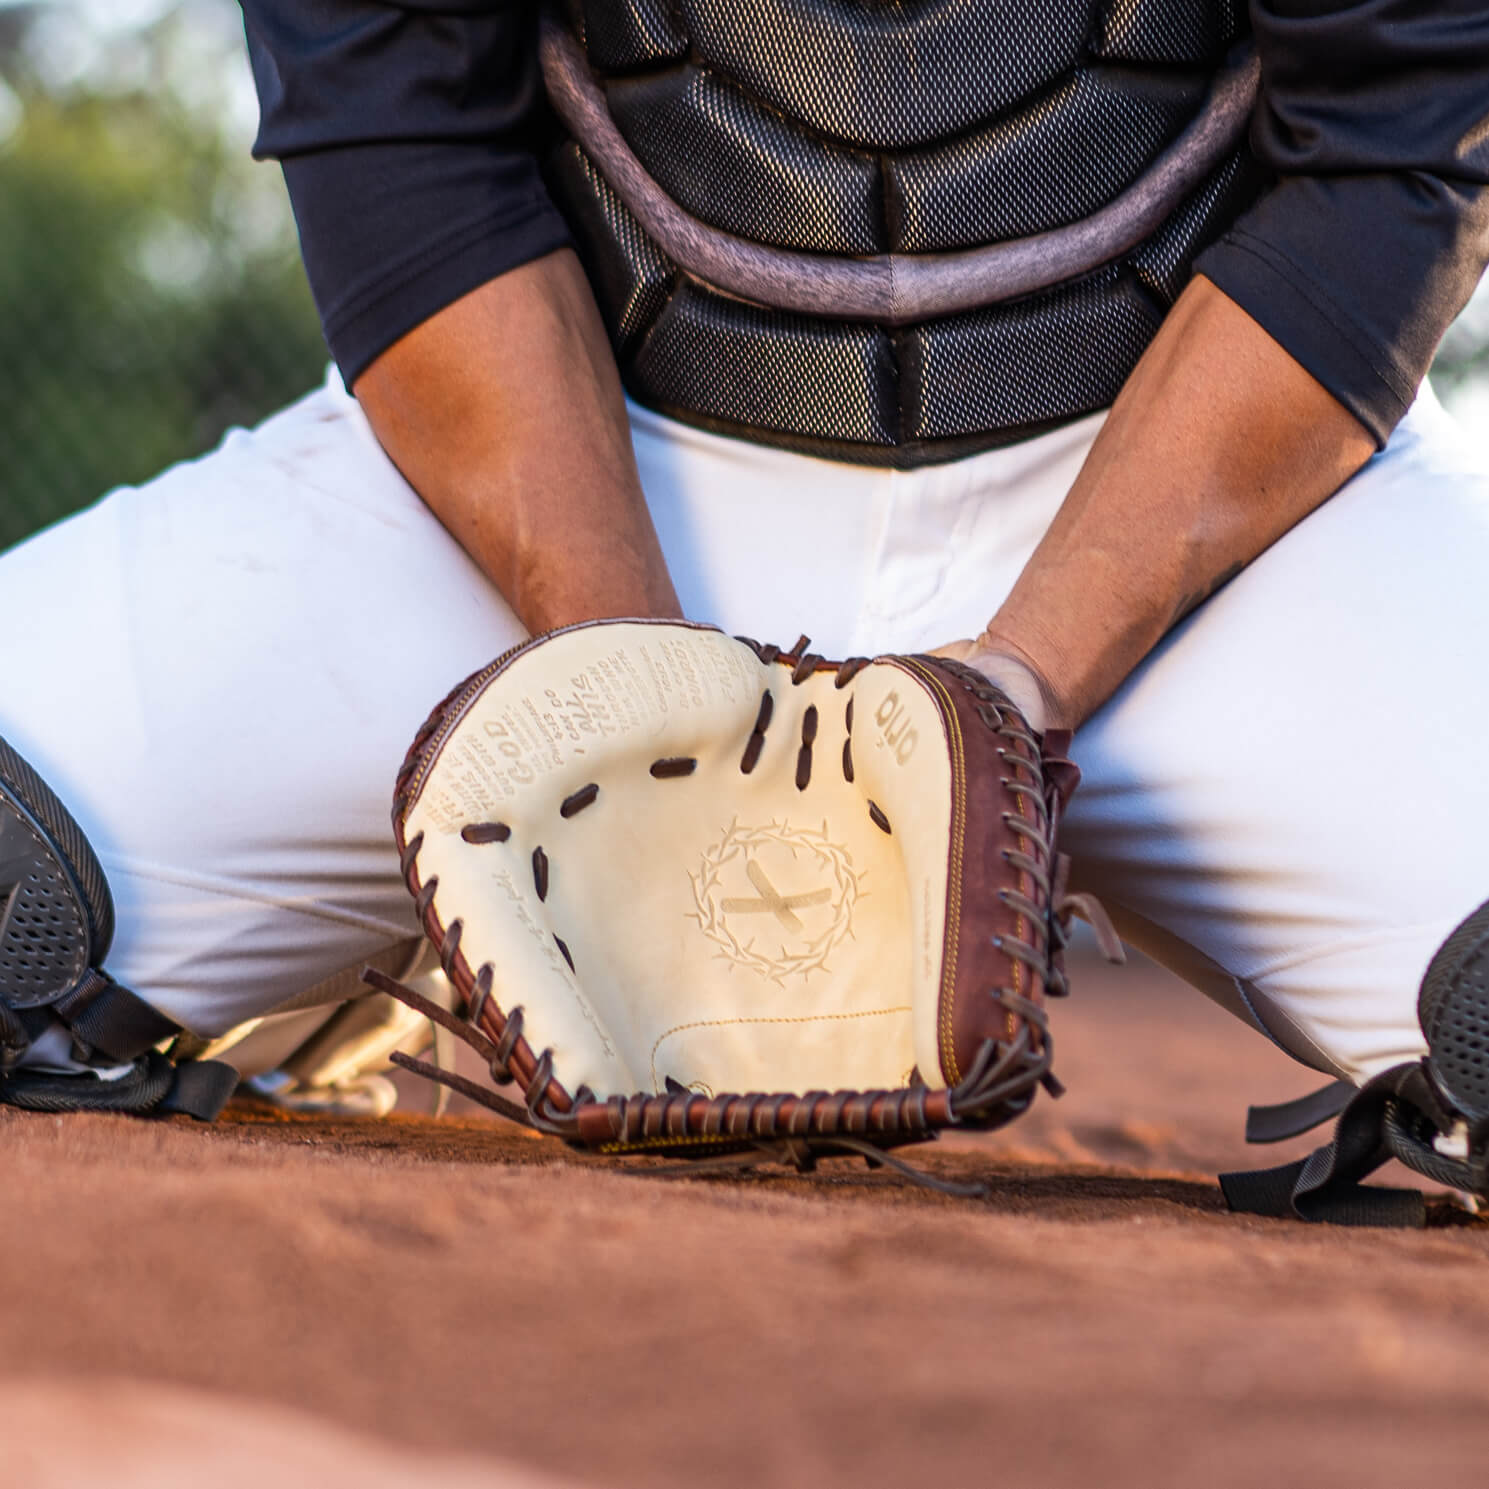 bible glove - baseball glove by luke weaver – Absolutely Ridiculous  innovation for Athletes